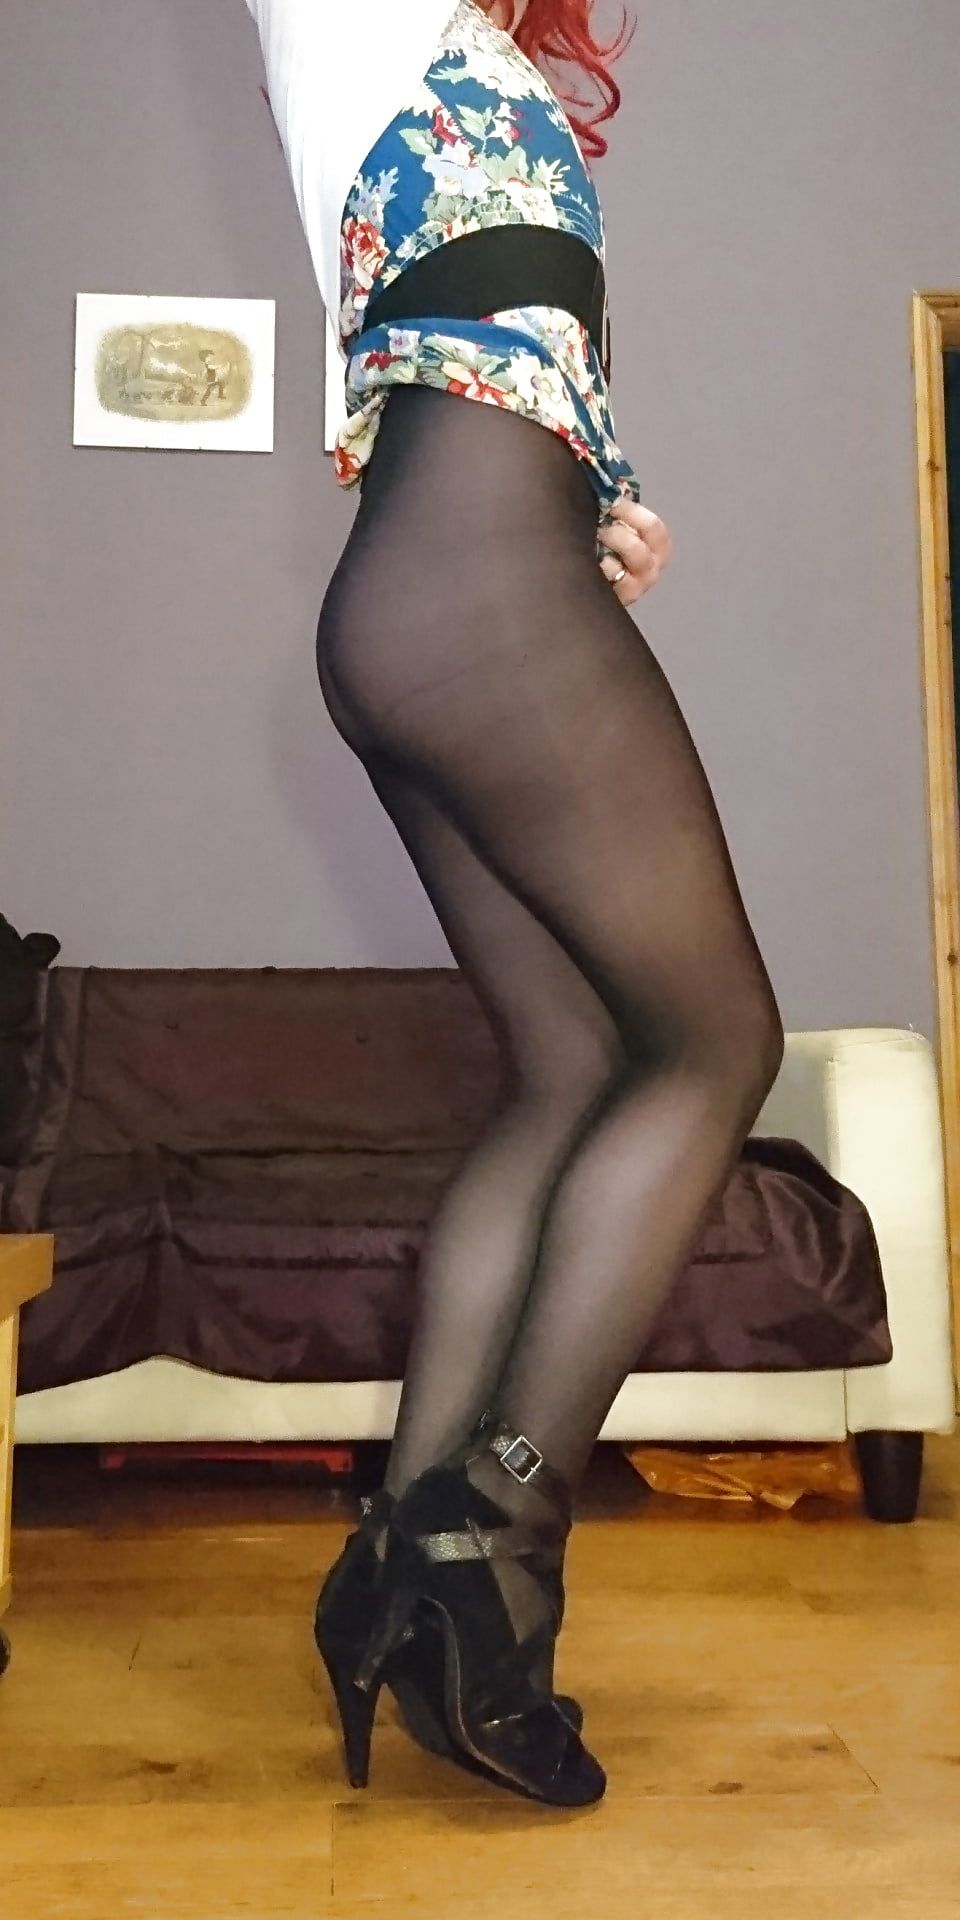 Marie crossdresser in opaque pantyhose and floral dress #4